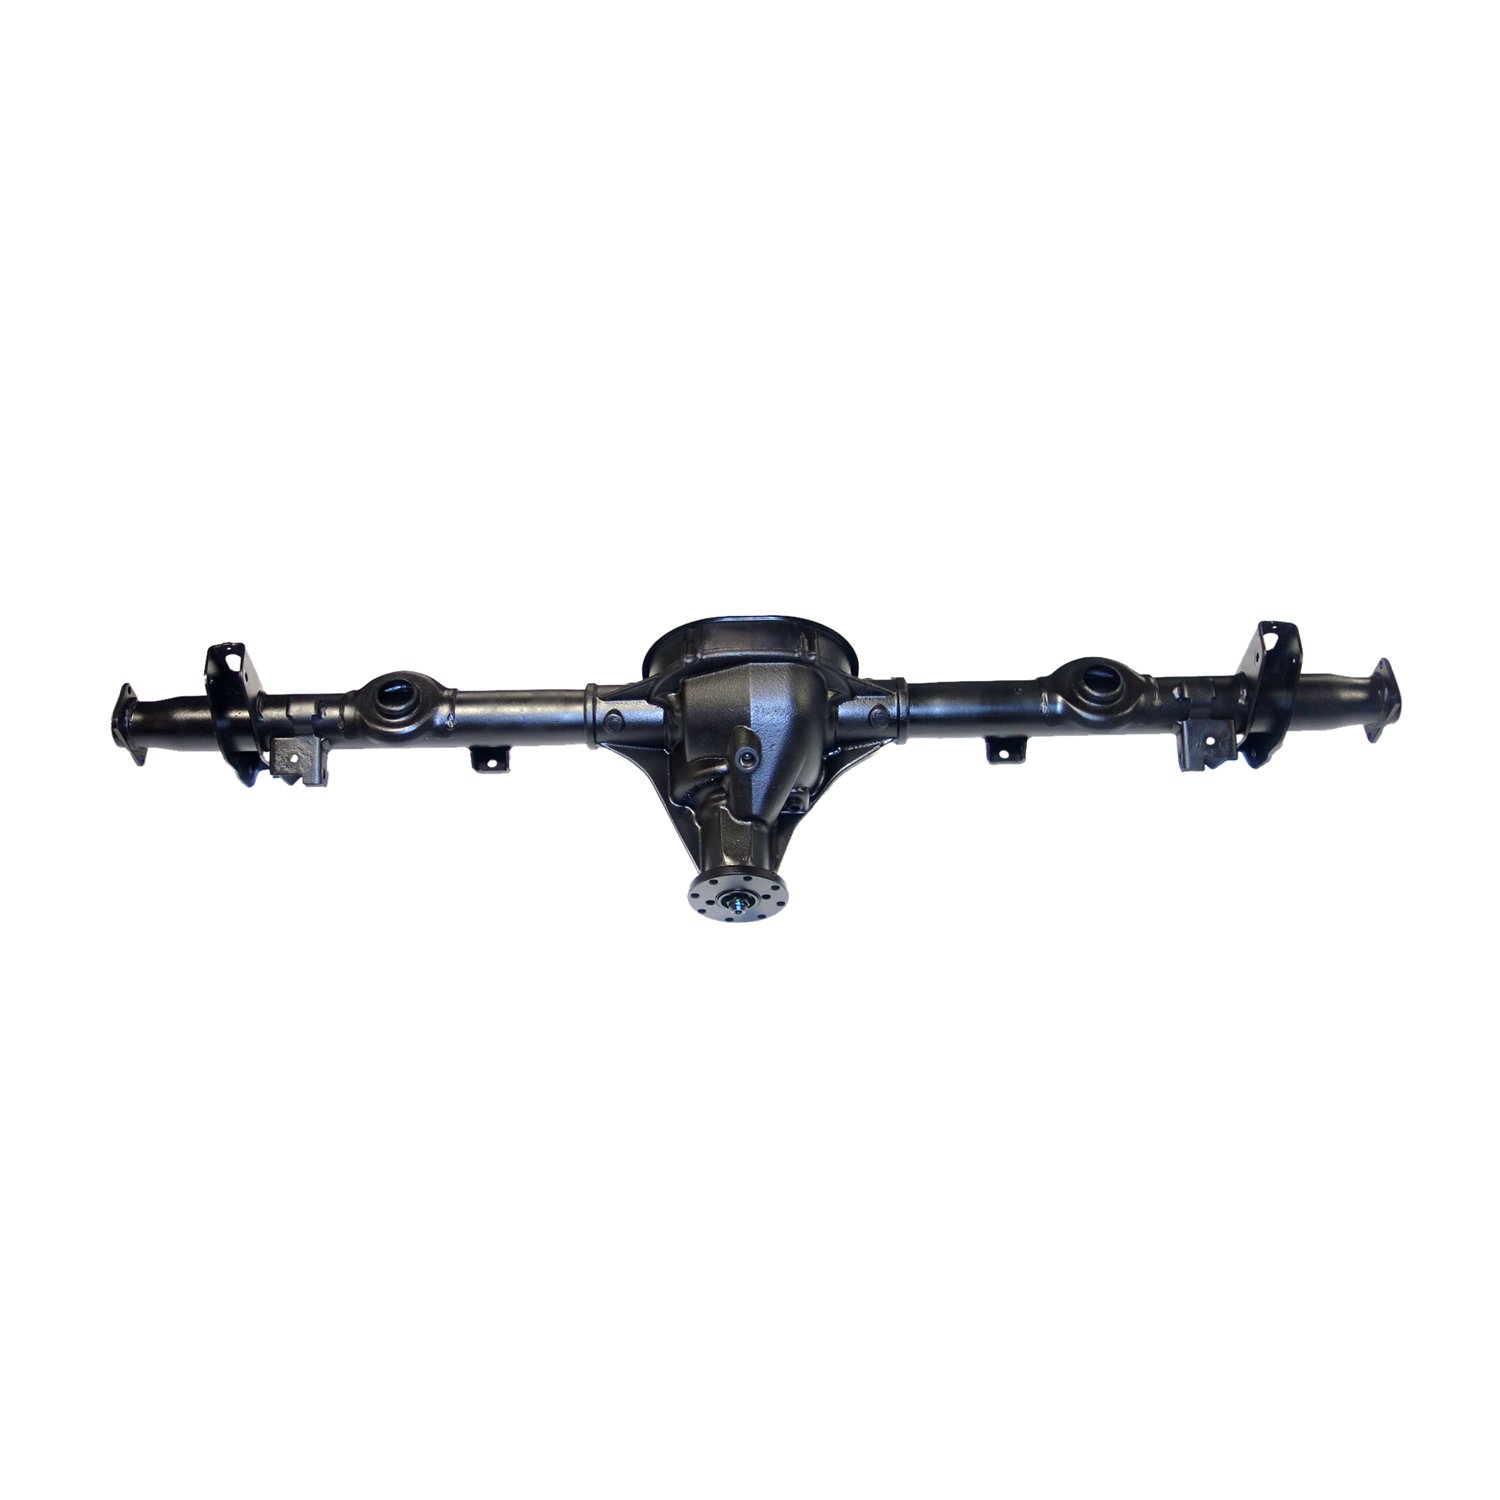 Remanufactured Axle Assy for 8.8" 98-00 Crown Vic, W/ABS W/O H&ling Package, 3.08 , Open